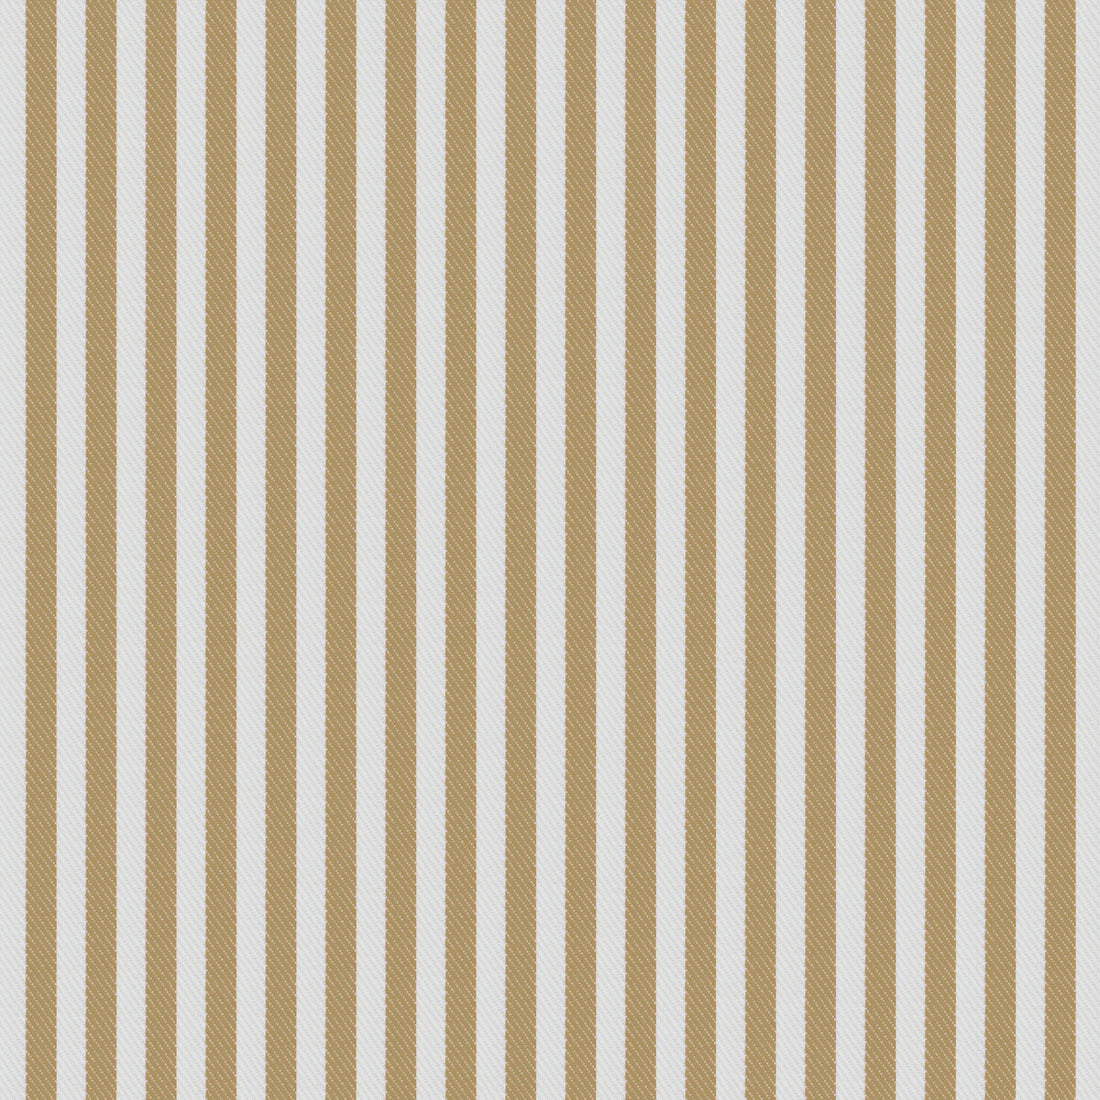 Calobra fabric in beige color - pattern GDT5684.009.0 - by Gaston y Daniela in the Gaston Maiorica collection